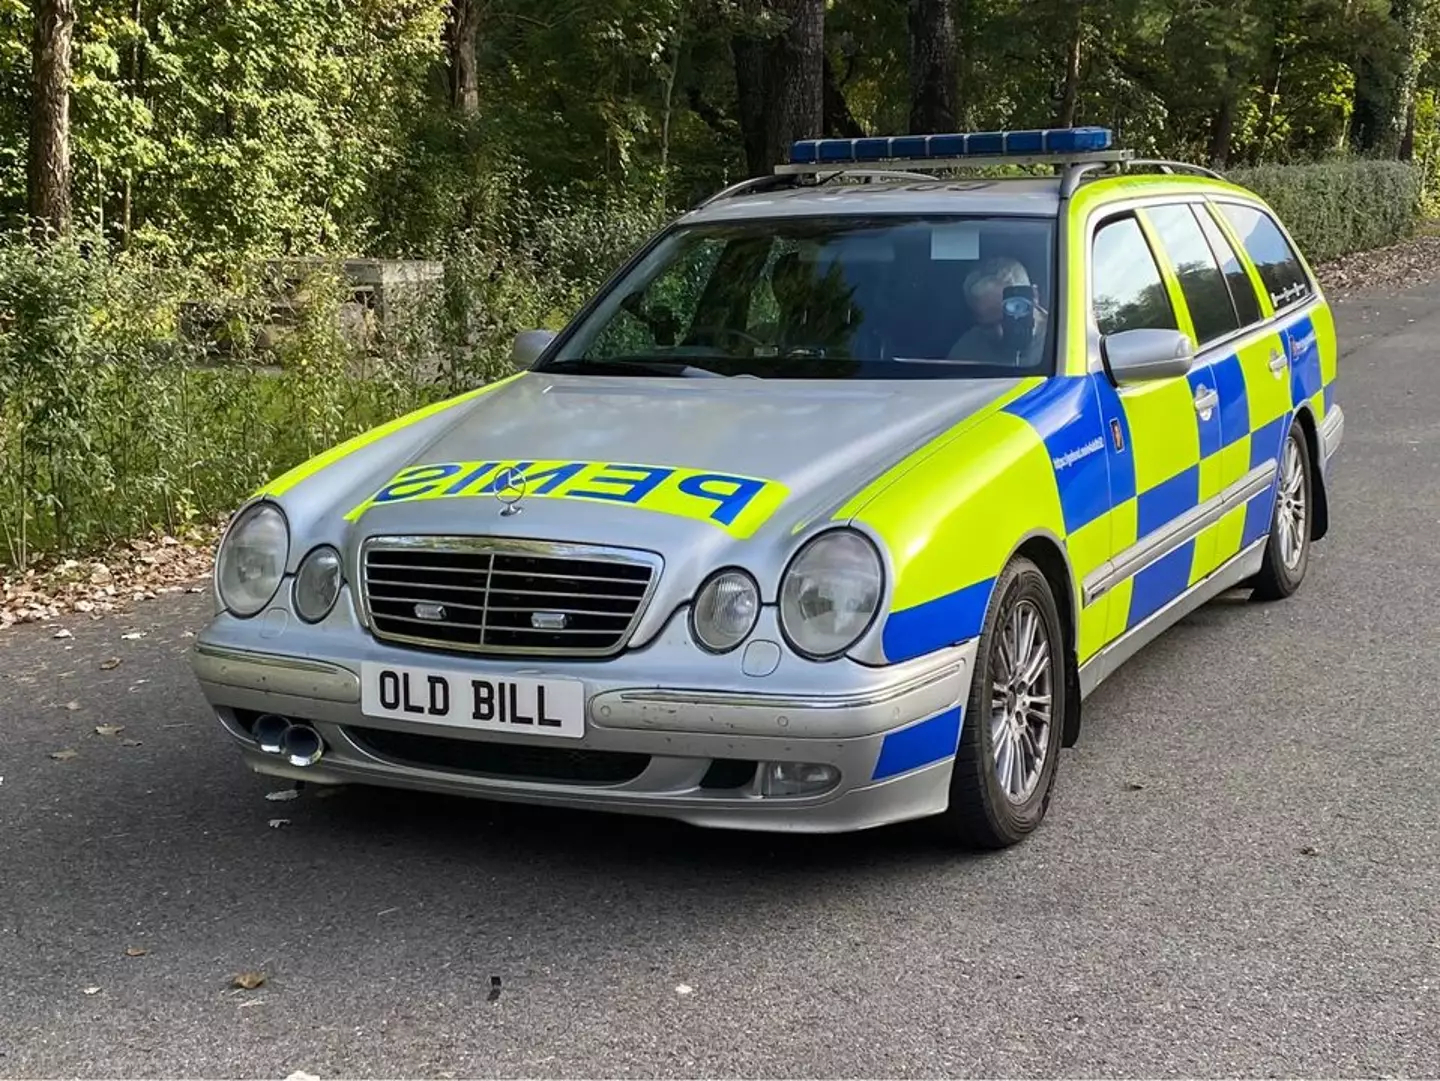 The 'police car' in all its glory.